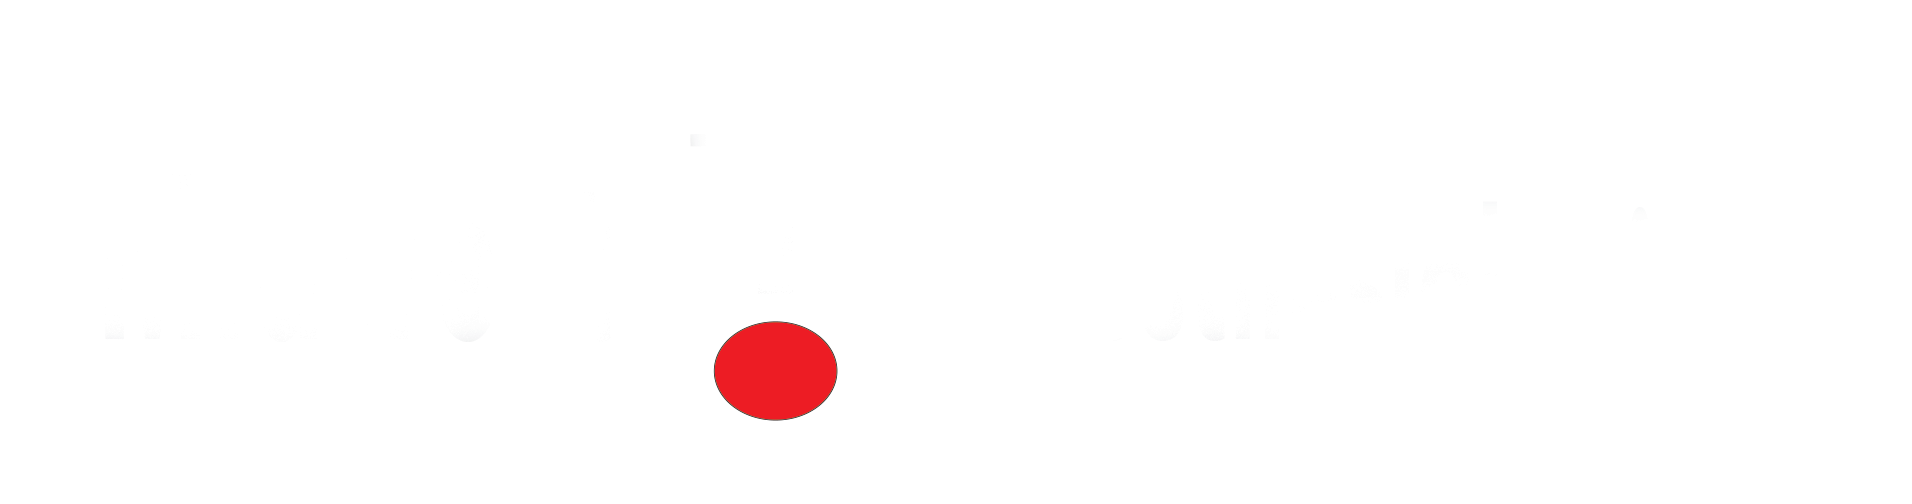 Midwest Anesthesiologists, Ltd.